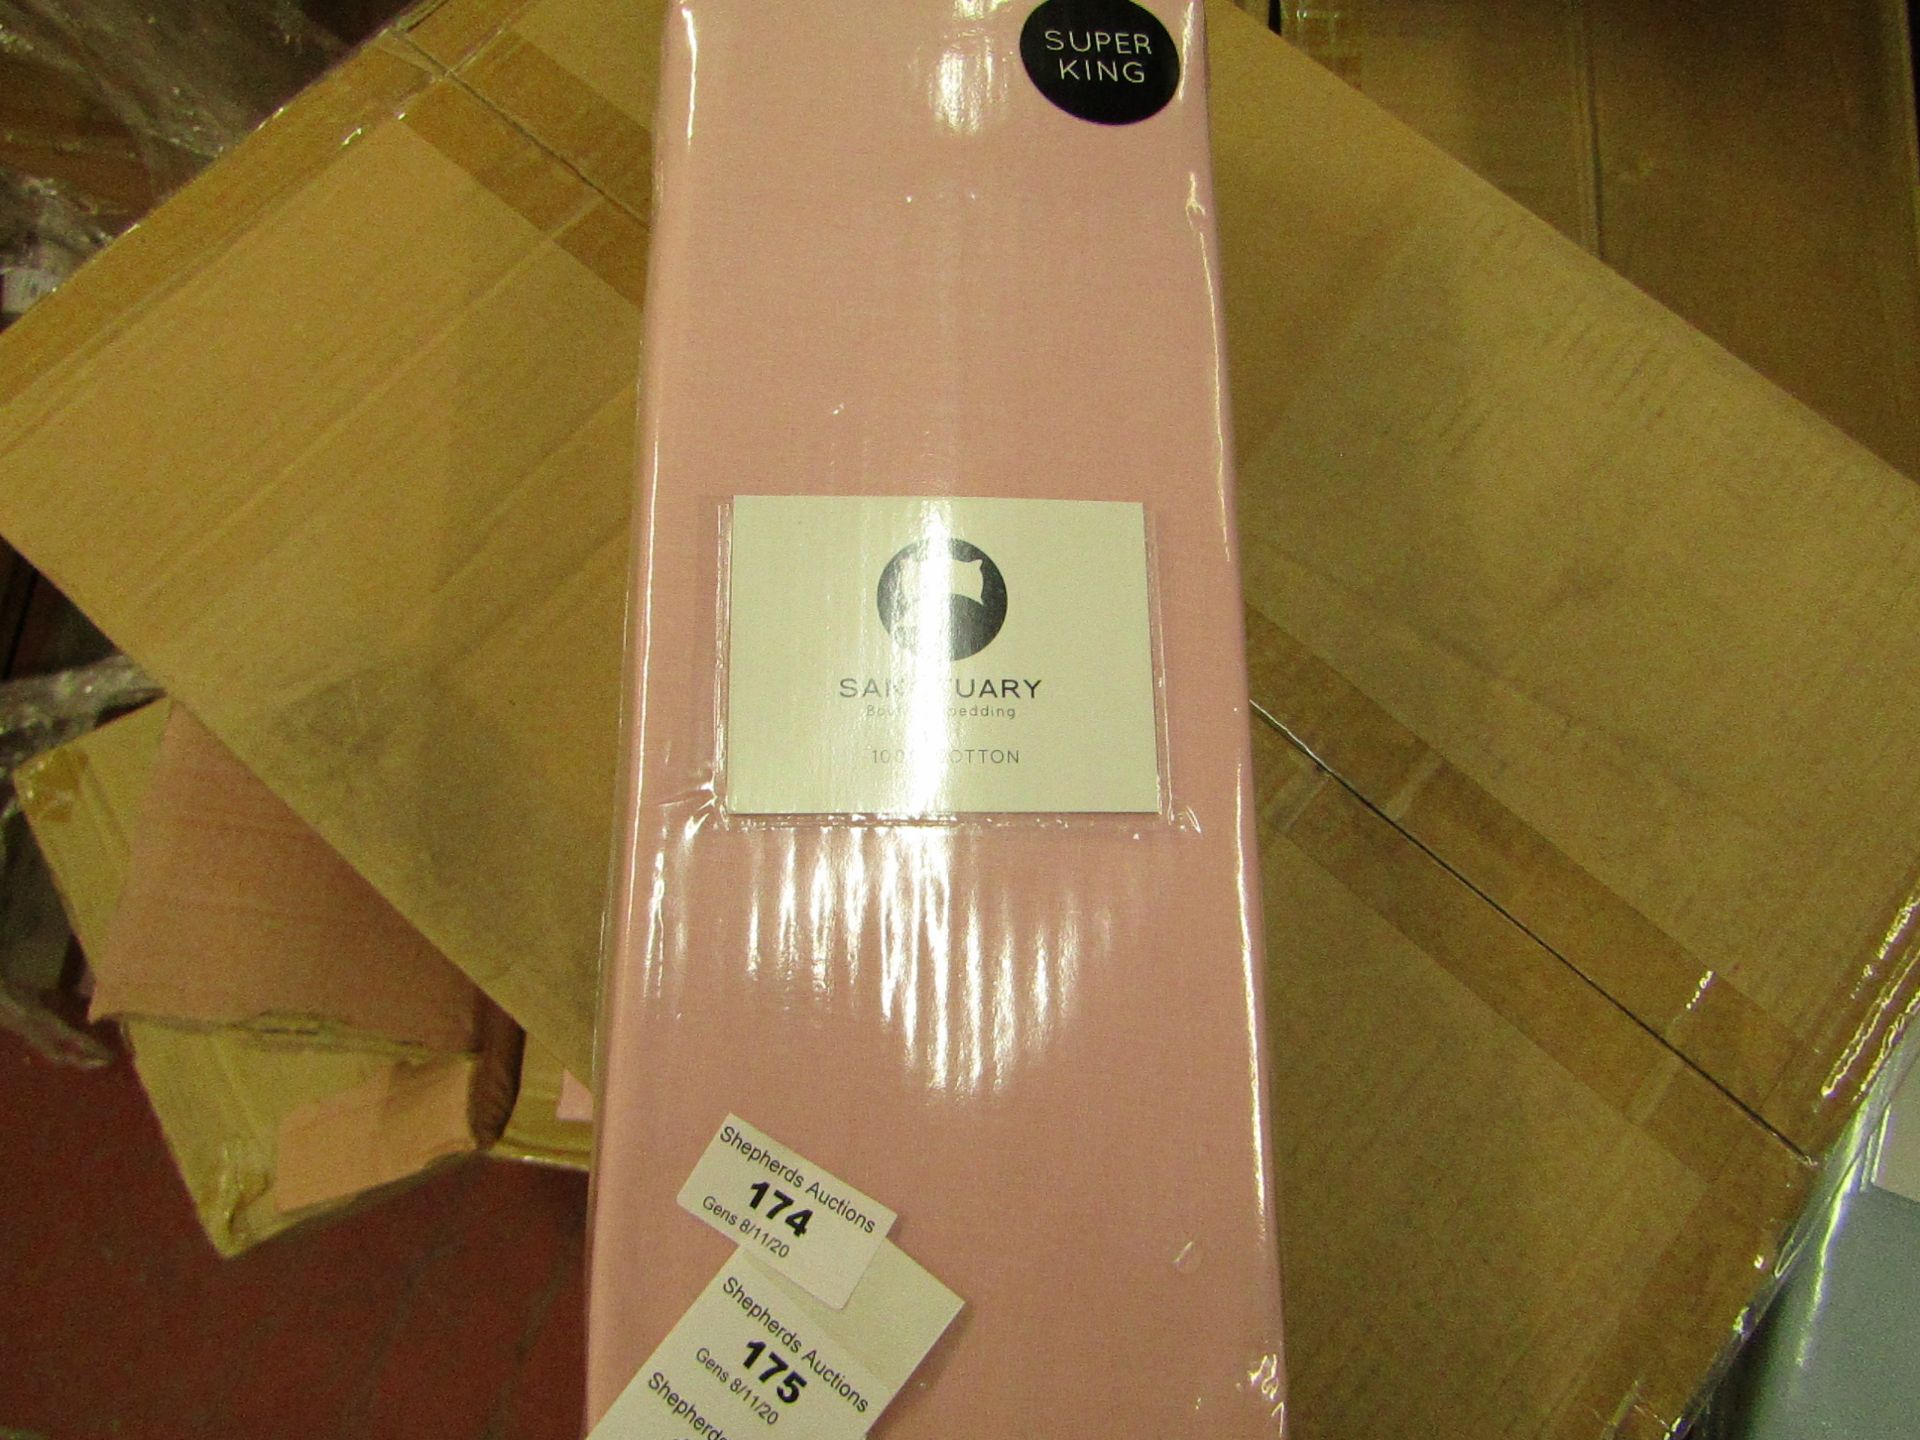 Sanctuary Superking Blush Fitted Sheet. New & Packaged